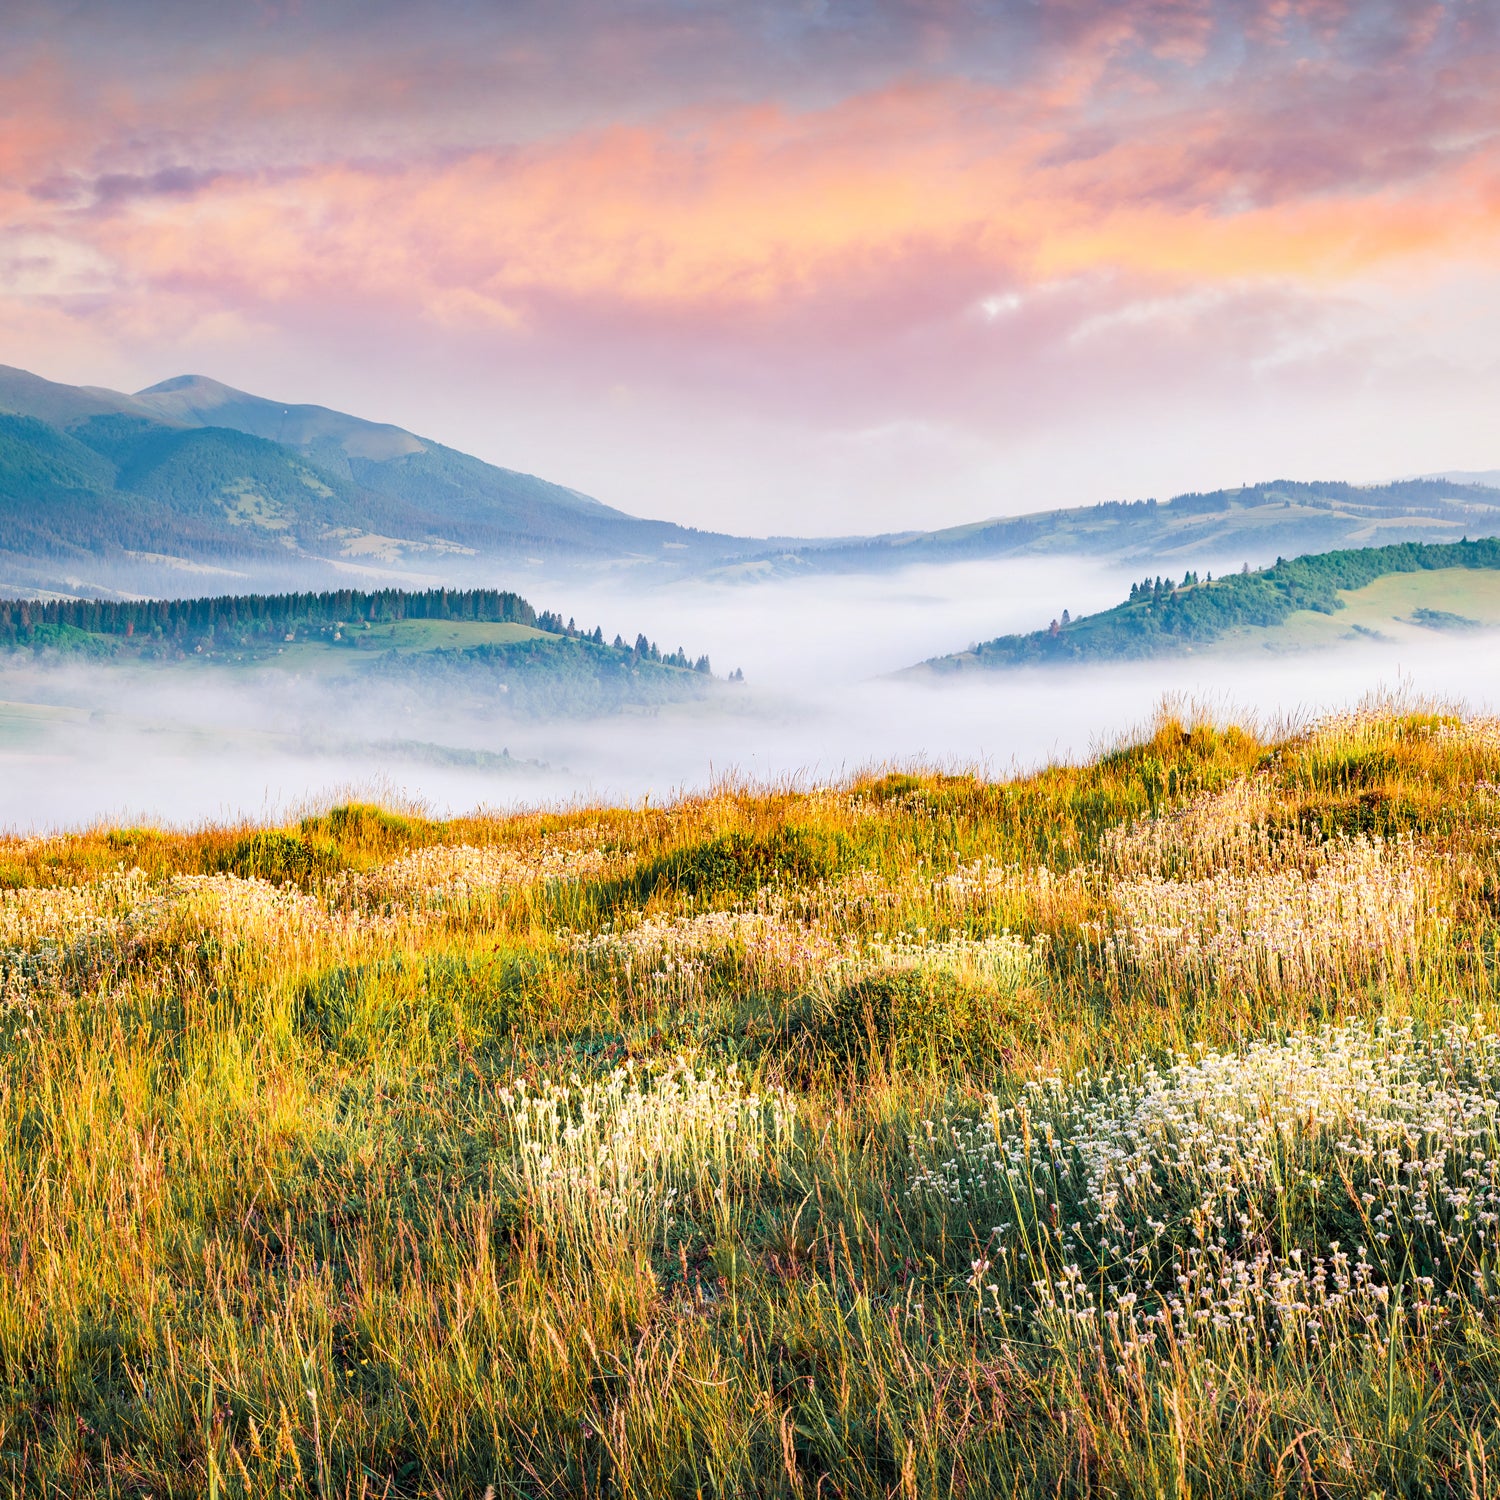 A serene mountain meadow with morning mist - the inspiration for this odor-neutralizing scented candle